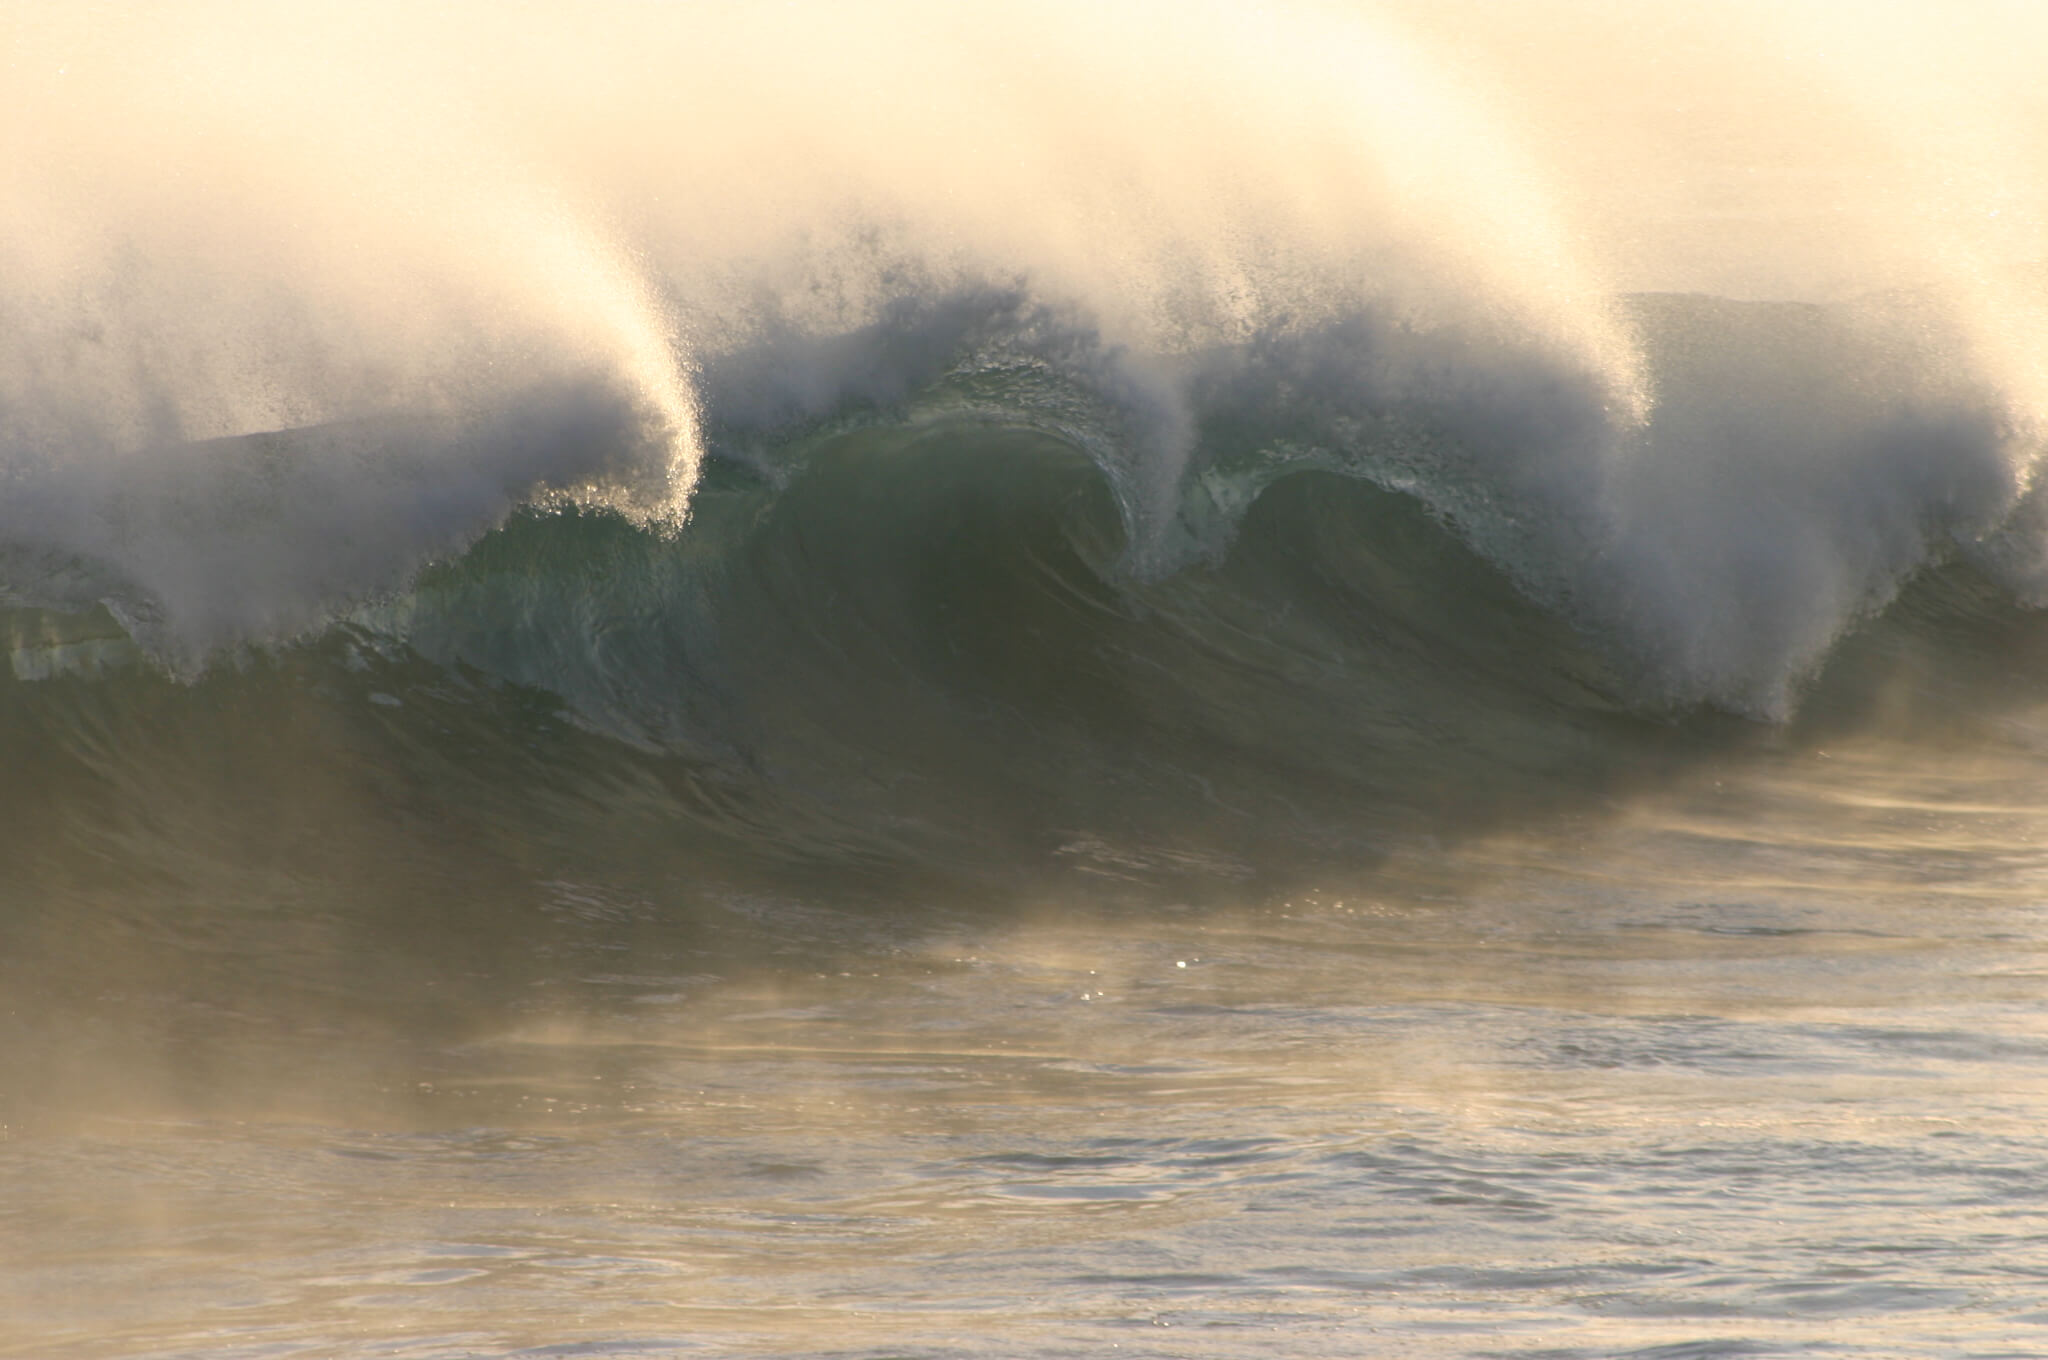 Picture of Large Ocean Wave Breaking Near Shore